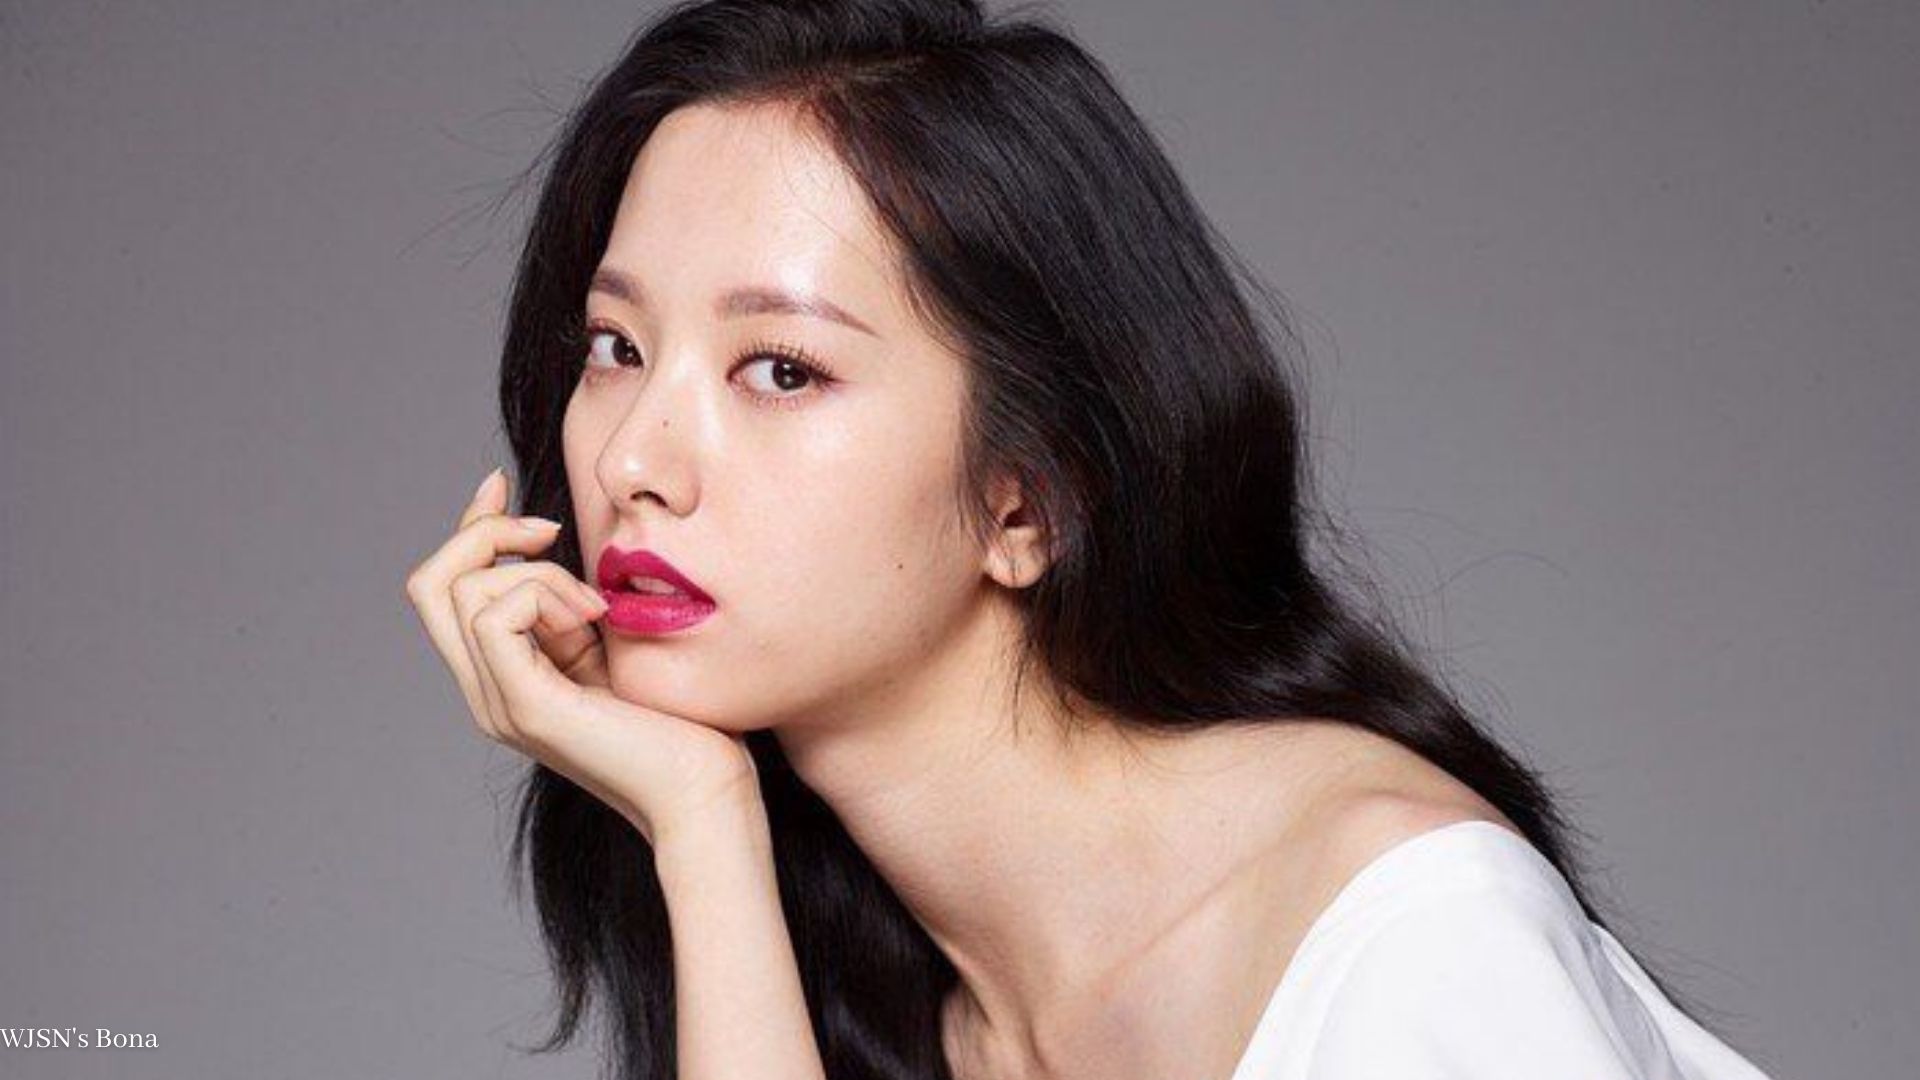 WJSN’s BONA Dating History – All About Her Relationship & Career